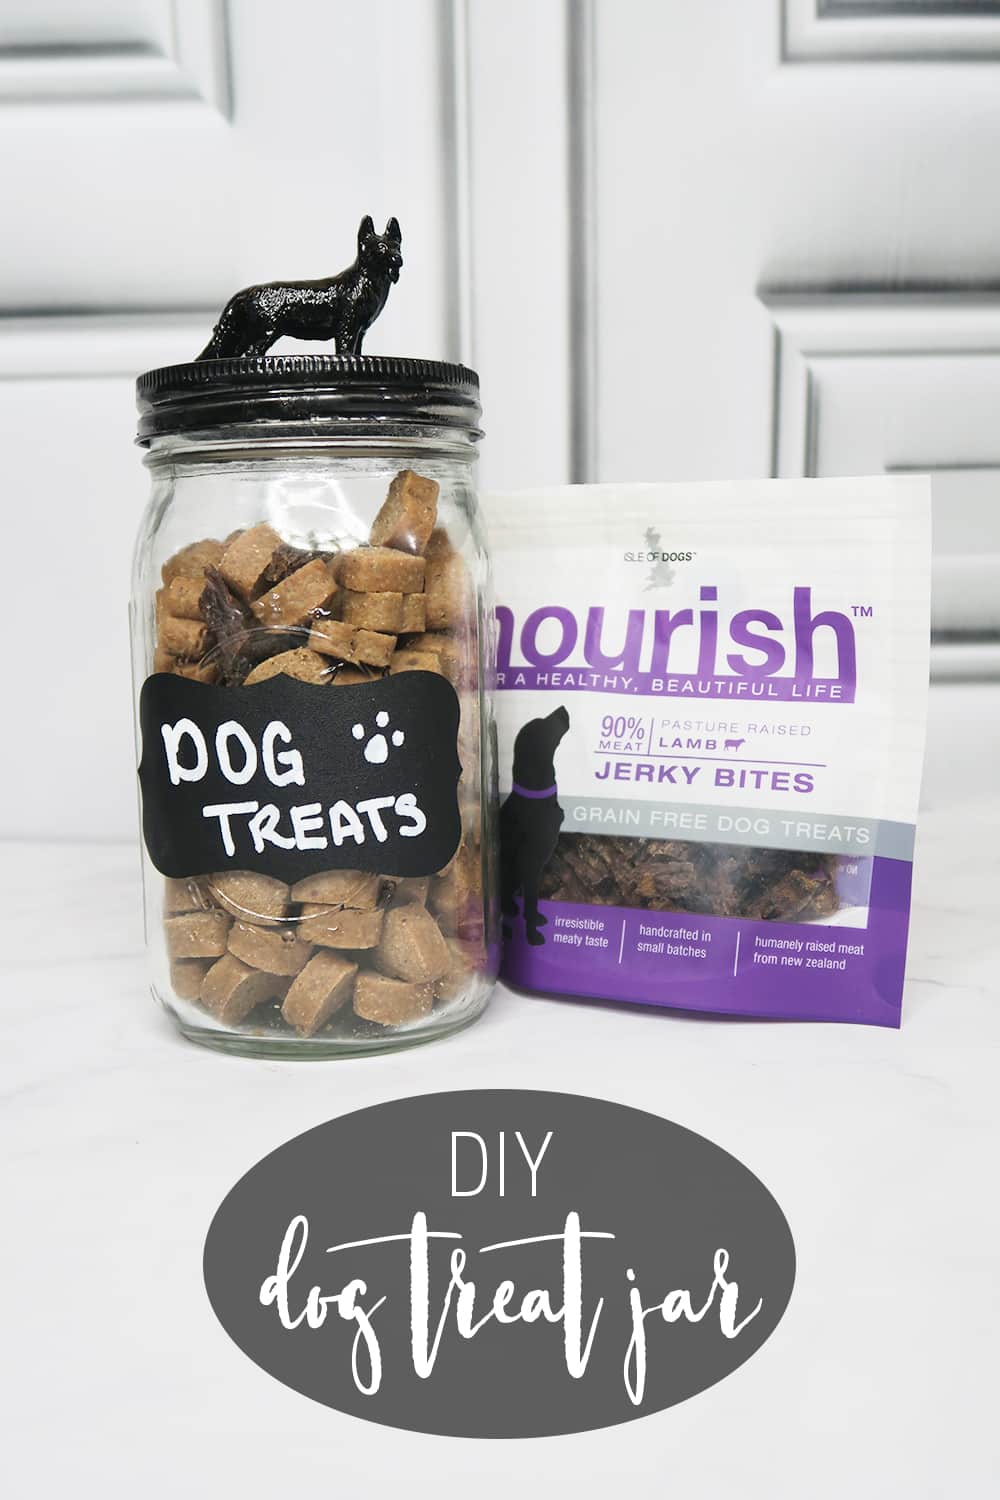 With just a few supplies, you can make this dog treat jar DIY. Keep for your furry friend or give it as a gift to a fellow dog lover!